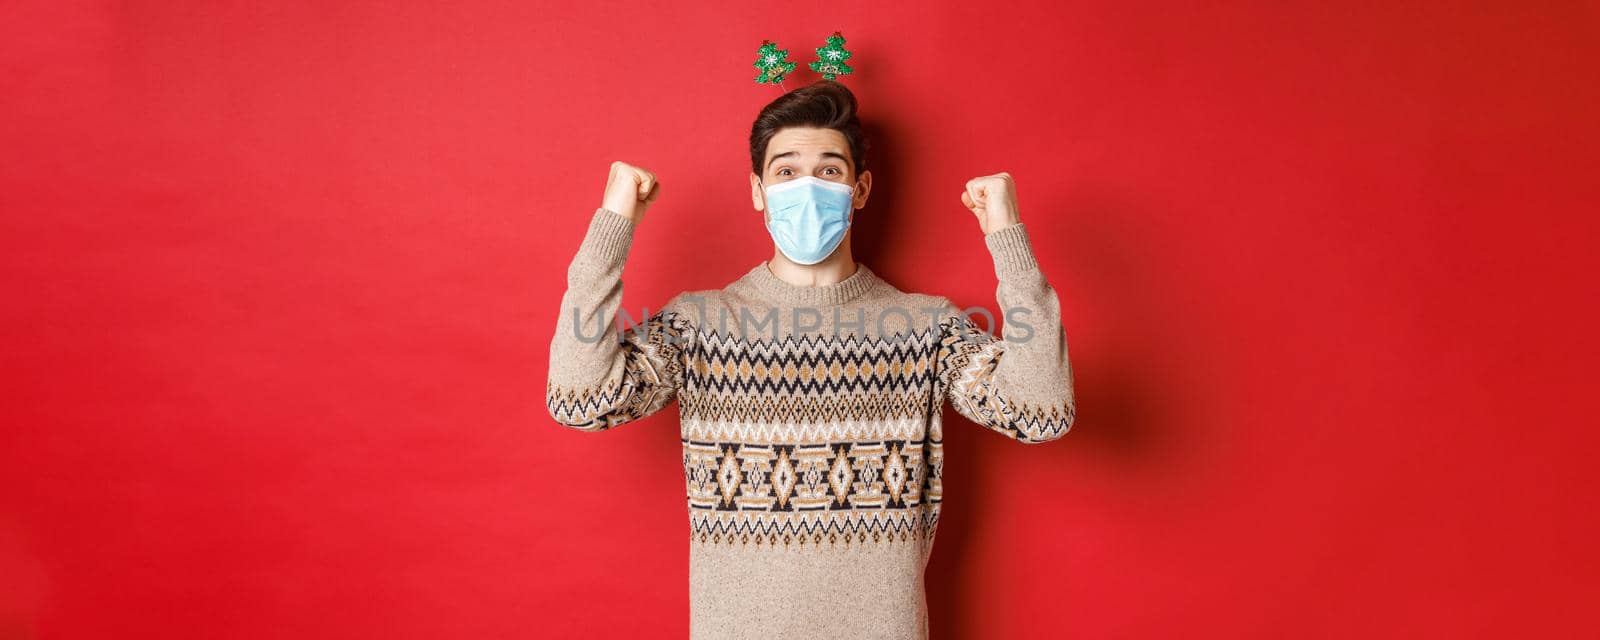 Concept of christmas, holidays and coronavirus. Happy man celebrating new year during covid-19 outbreak, wearing medical mask and sweater, rejoicing over red background by Benzoix